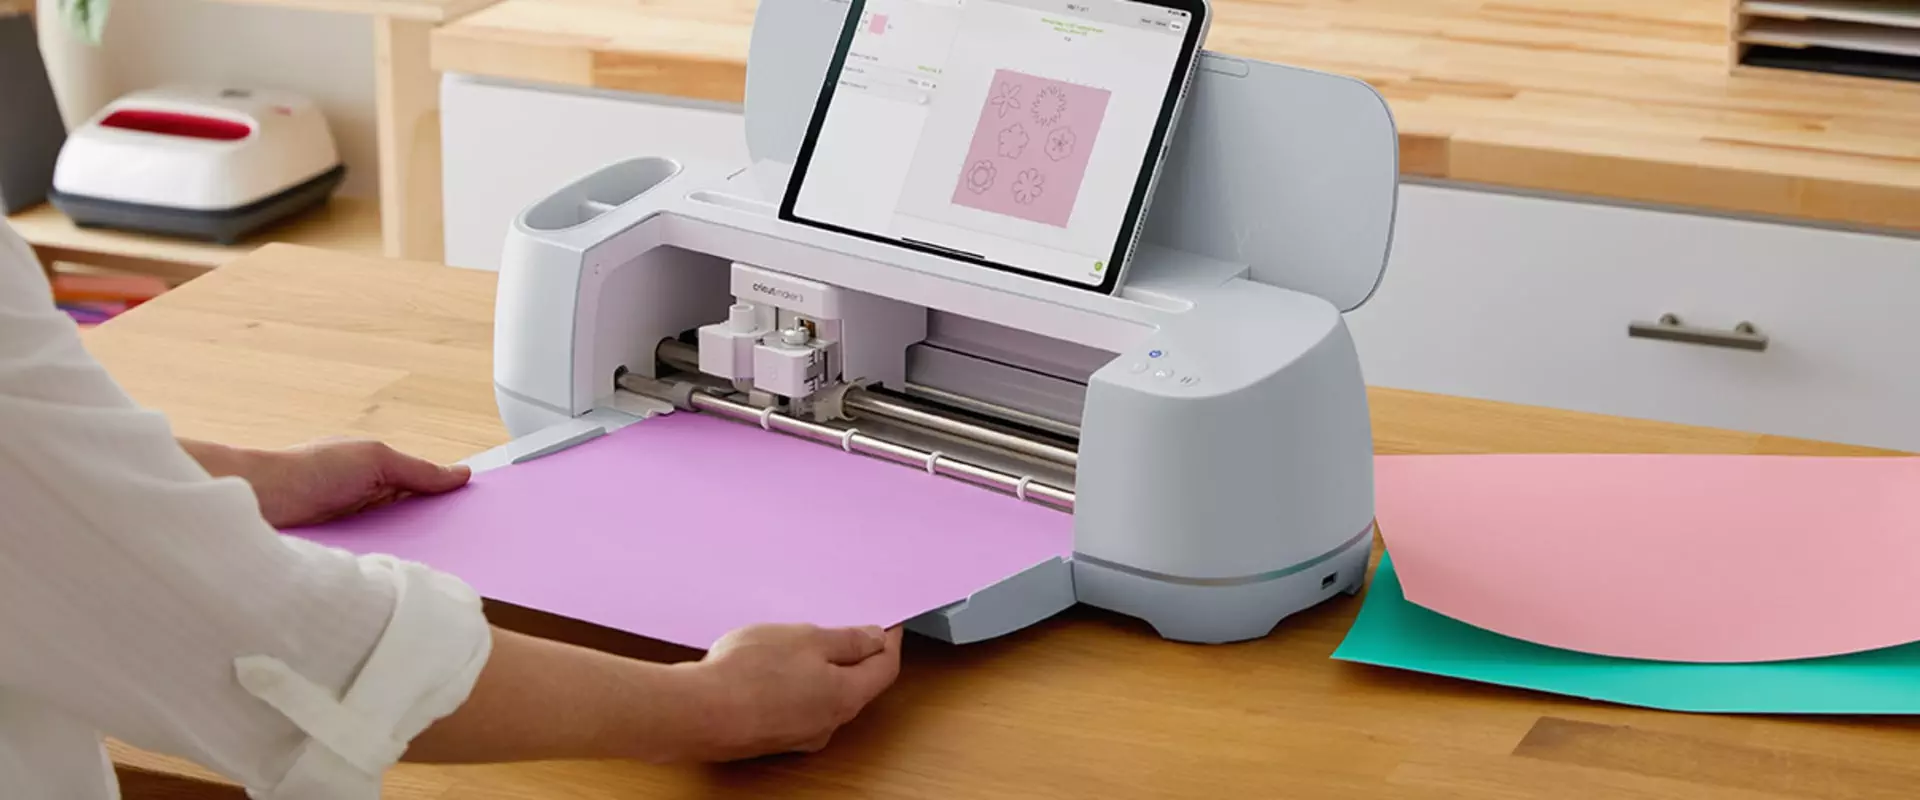 Which ipad works with the cricut design?